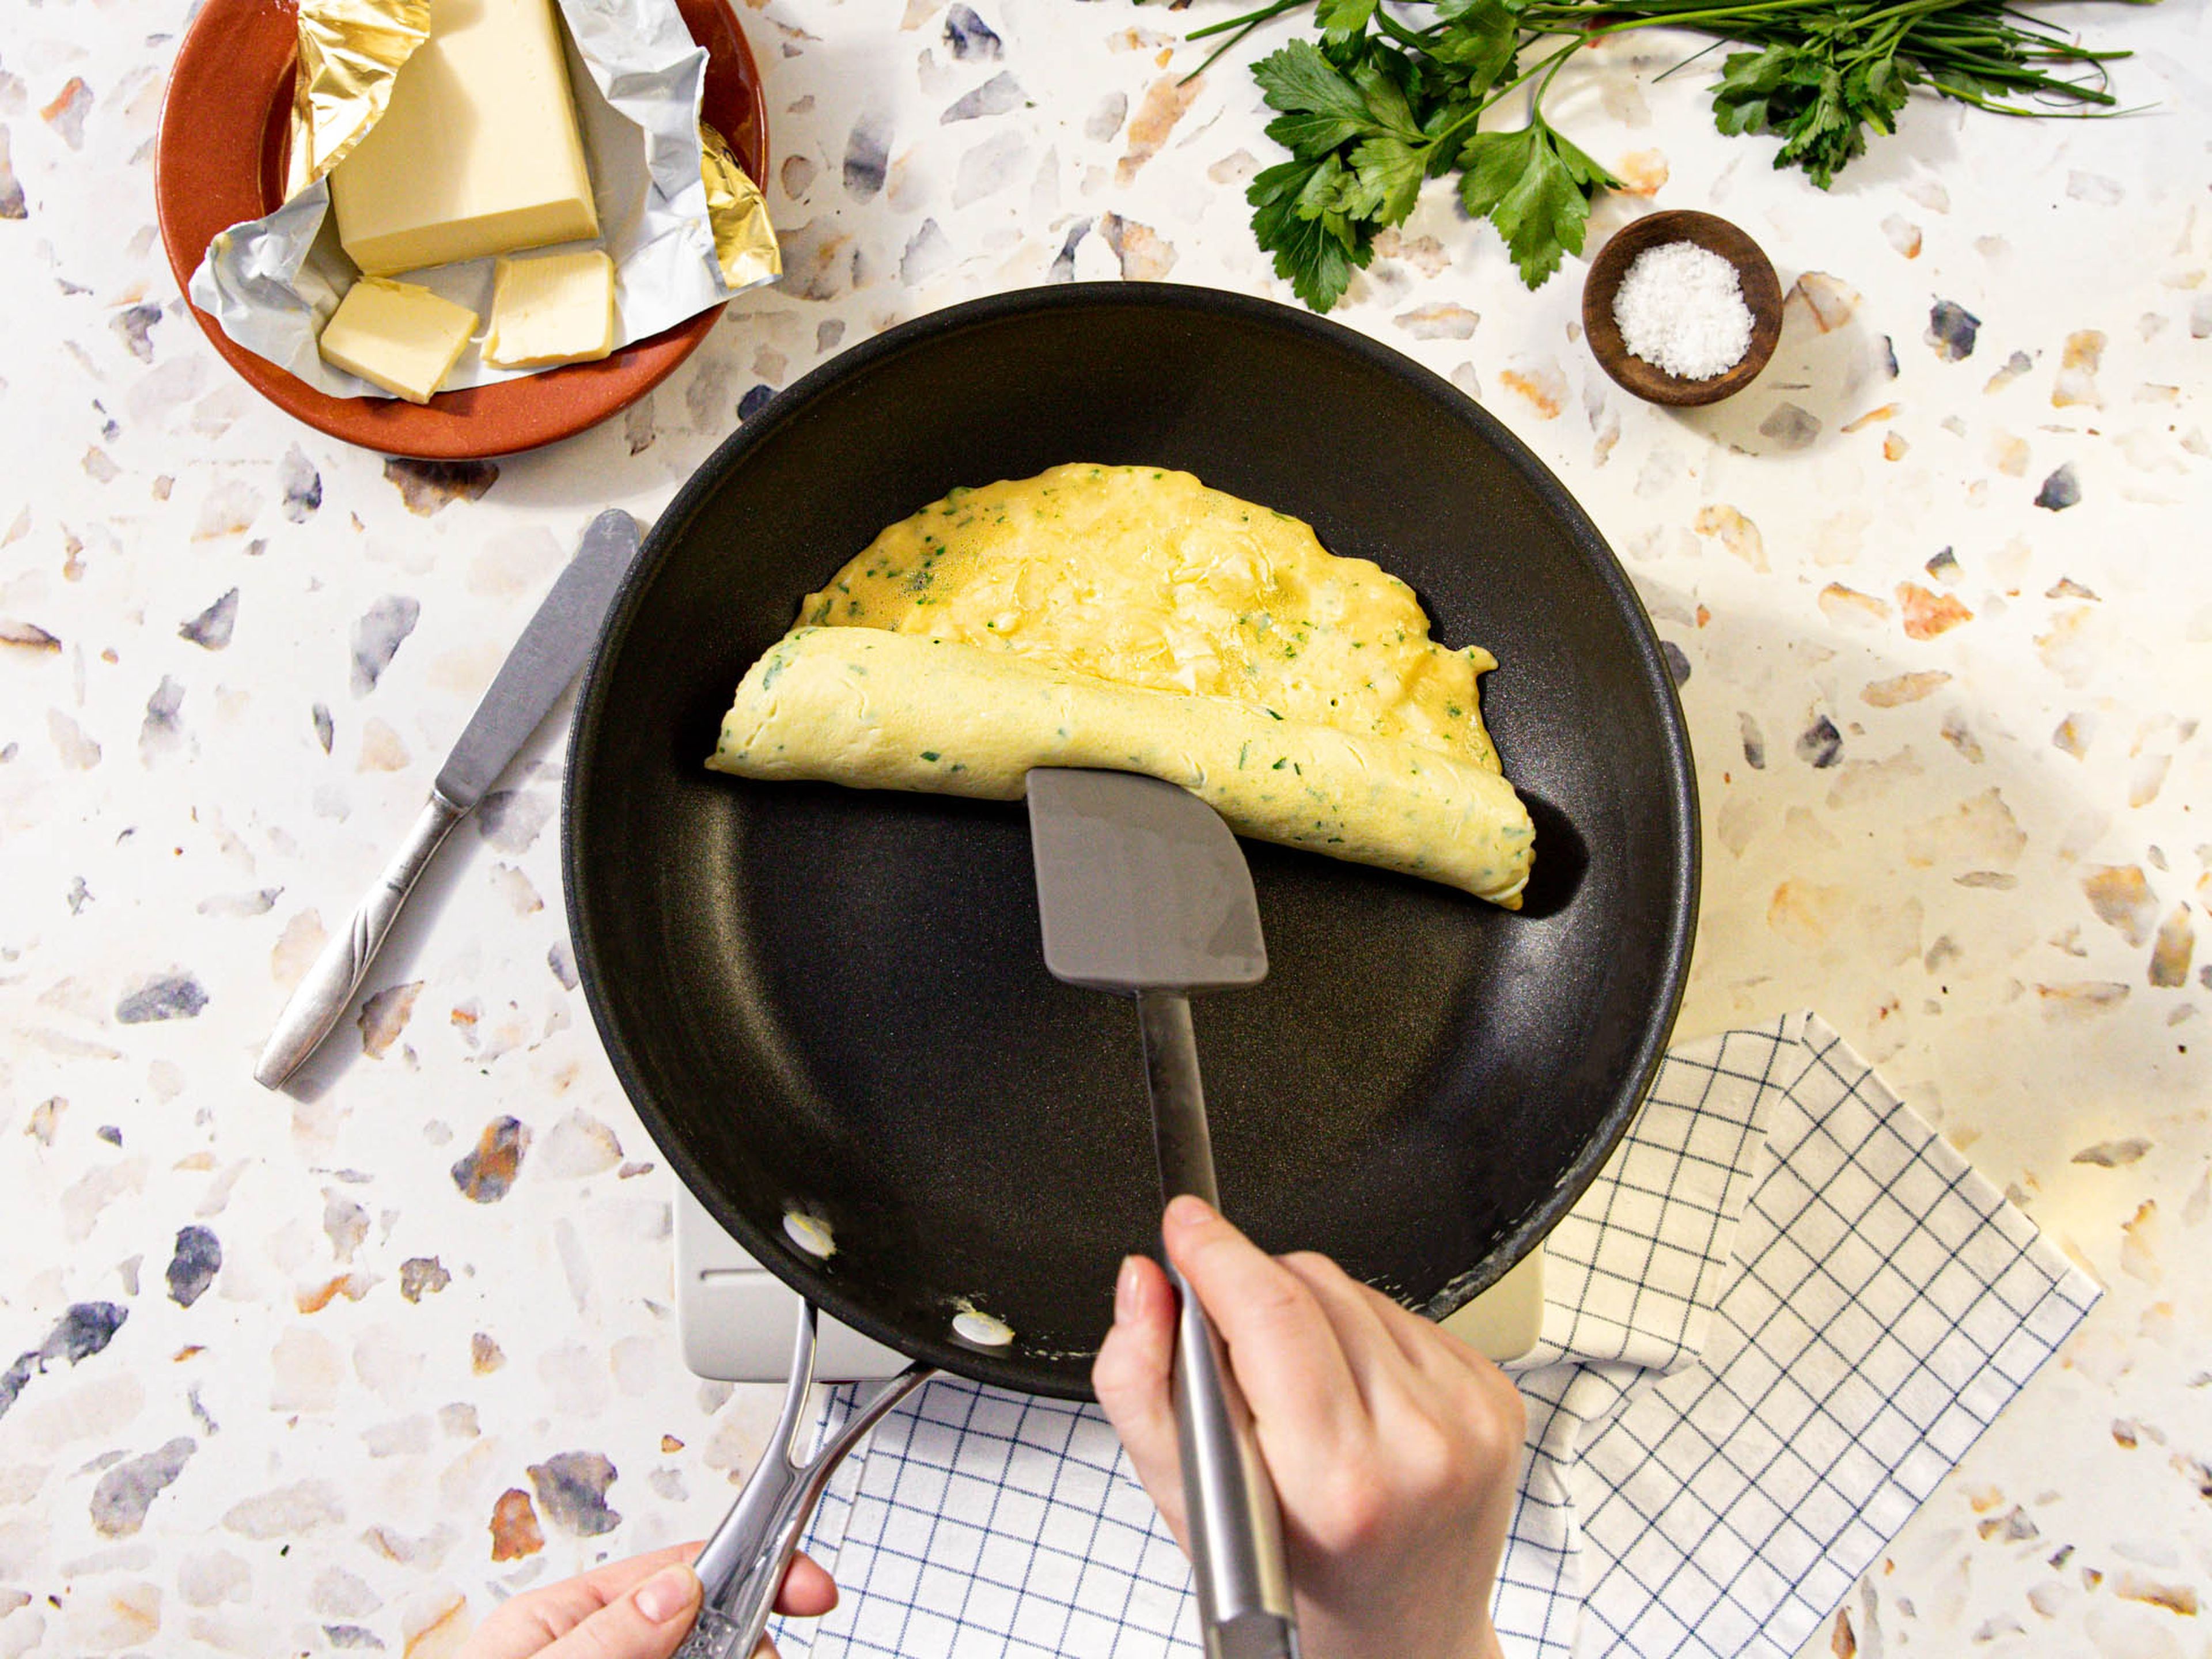 Scatter cheese over the eggs. If the mixture looks too runny, let sit for approx. 20 sec., then lift up the opposite edge with a spatula and roll it over slightly. Carefully transfer to a plate and garnish with more herbs, and butter, if desired. Enjoy!